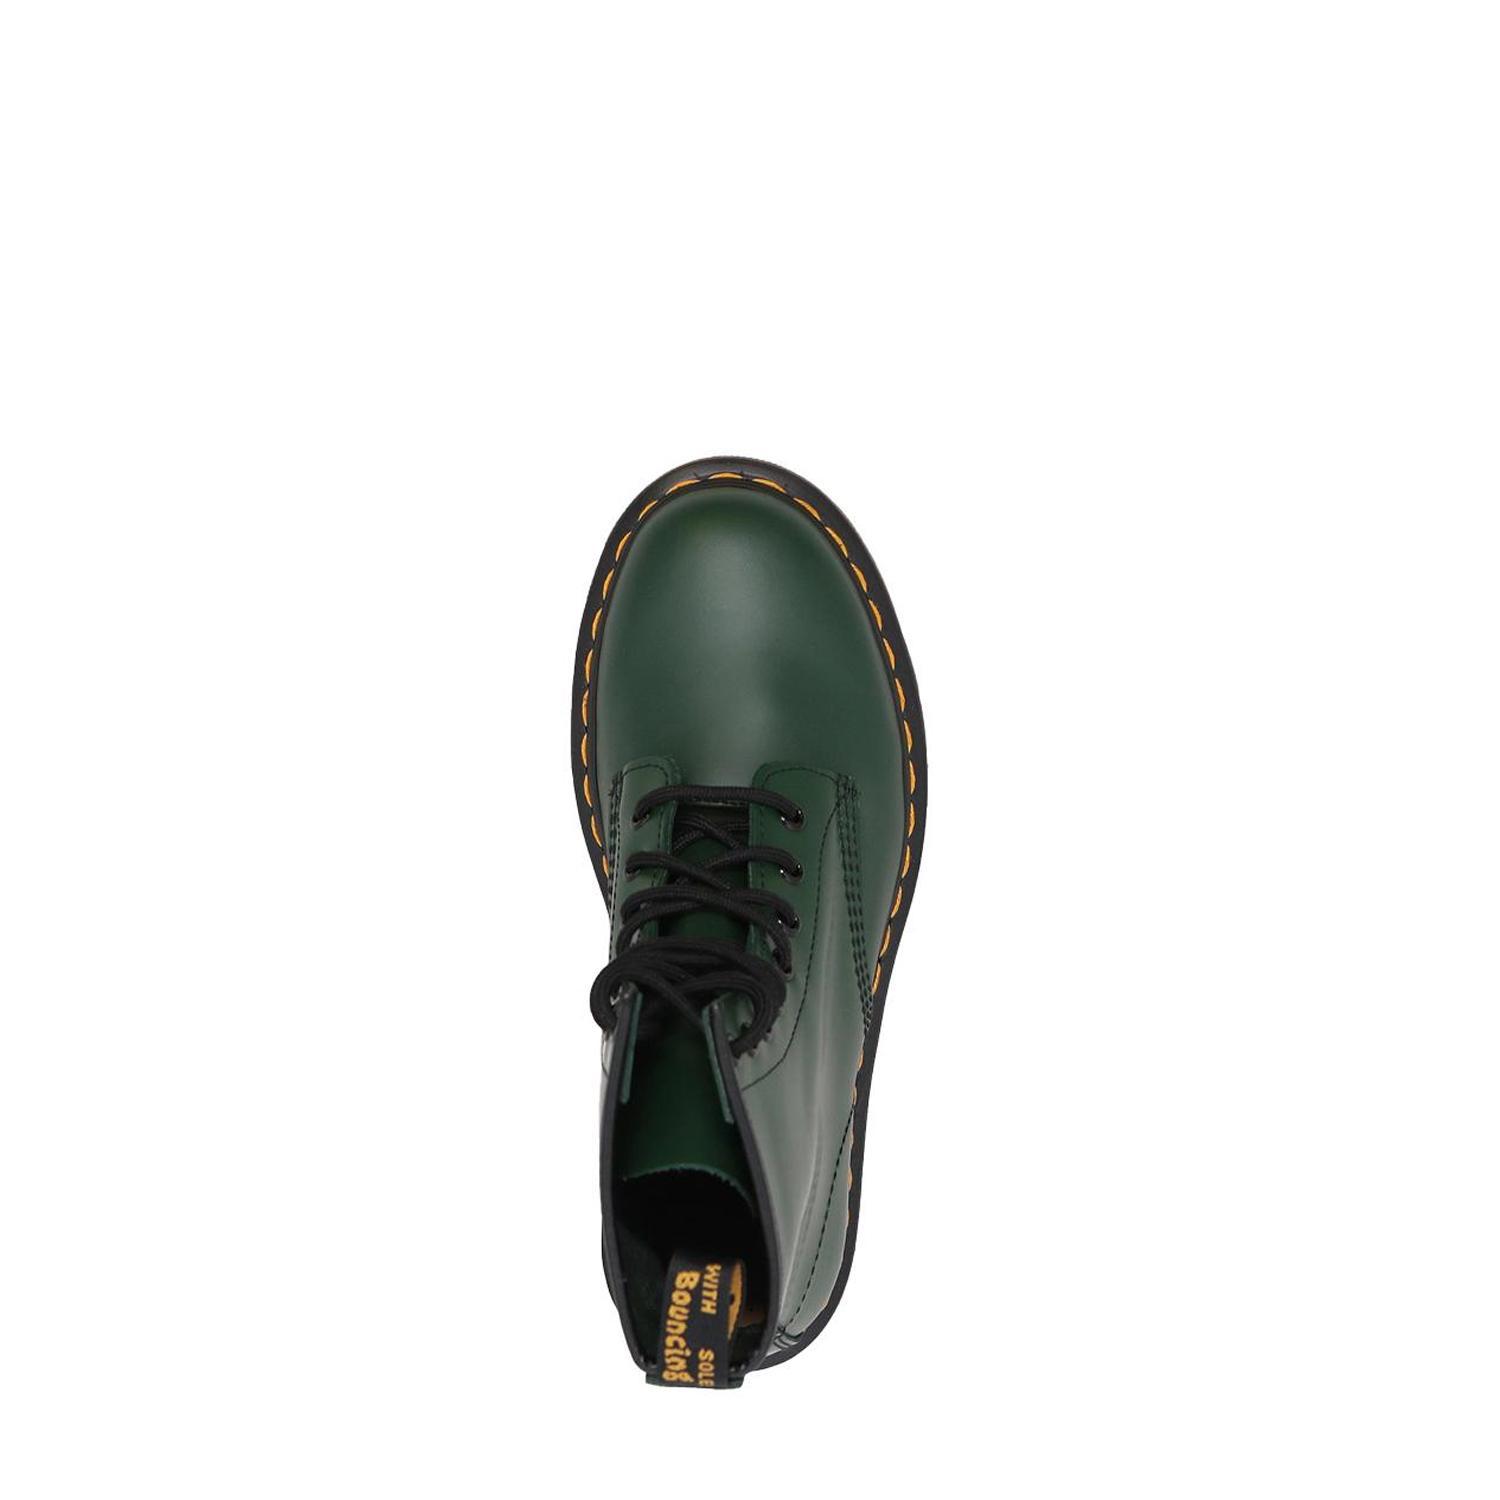 Dr.martens 1460 Smooth GREEN SMOOTH